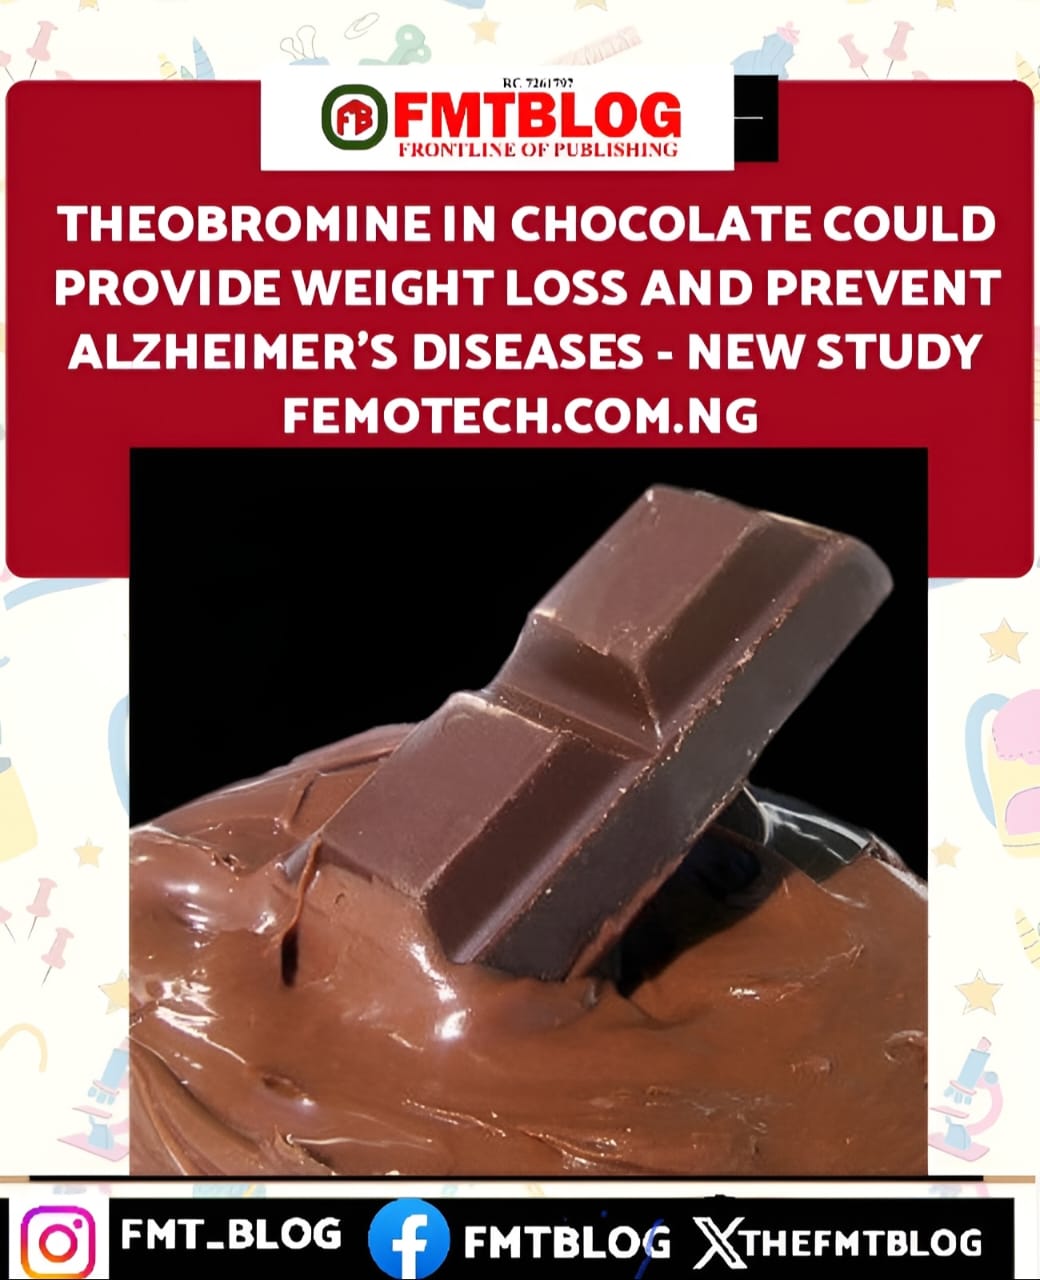 Theobromine In Chocolate Could Provide Weight Loss And Prevent Alzheimer’s Diseases- New Study